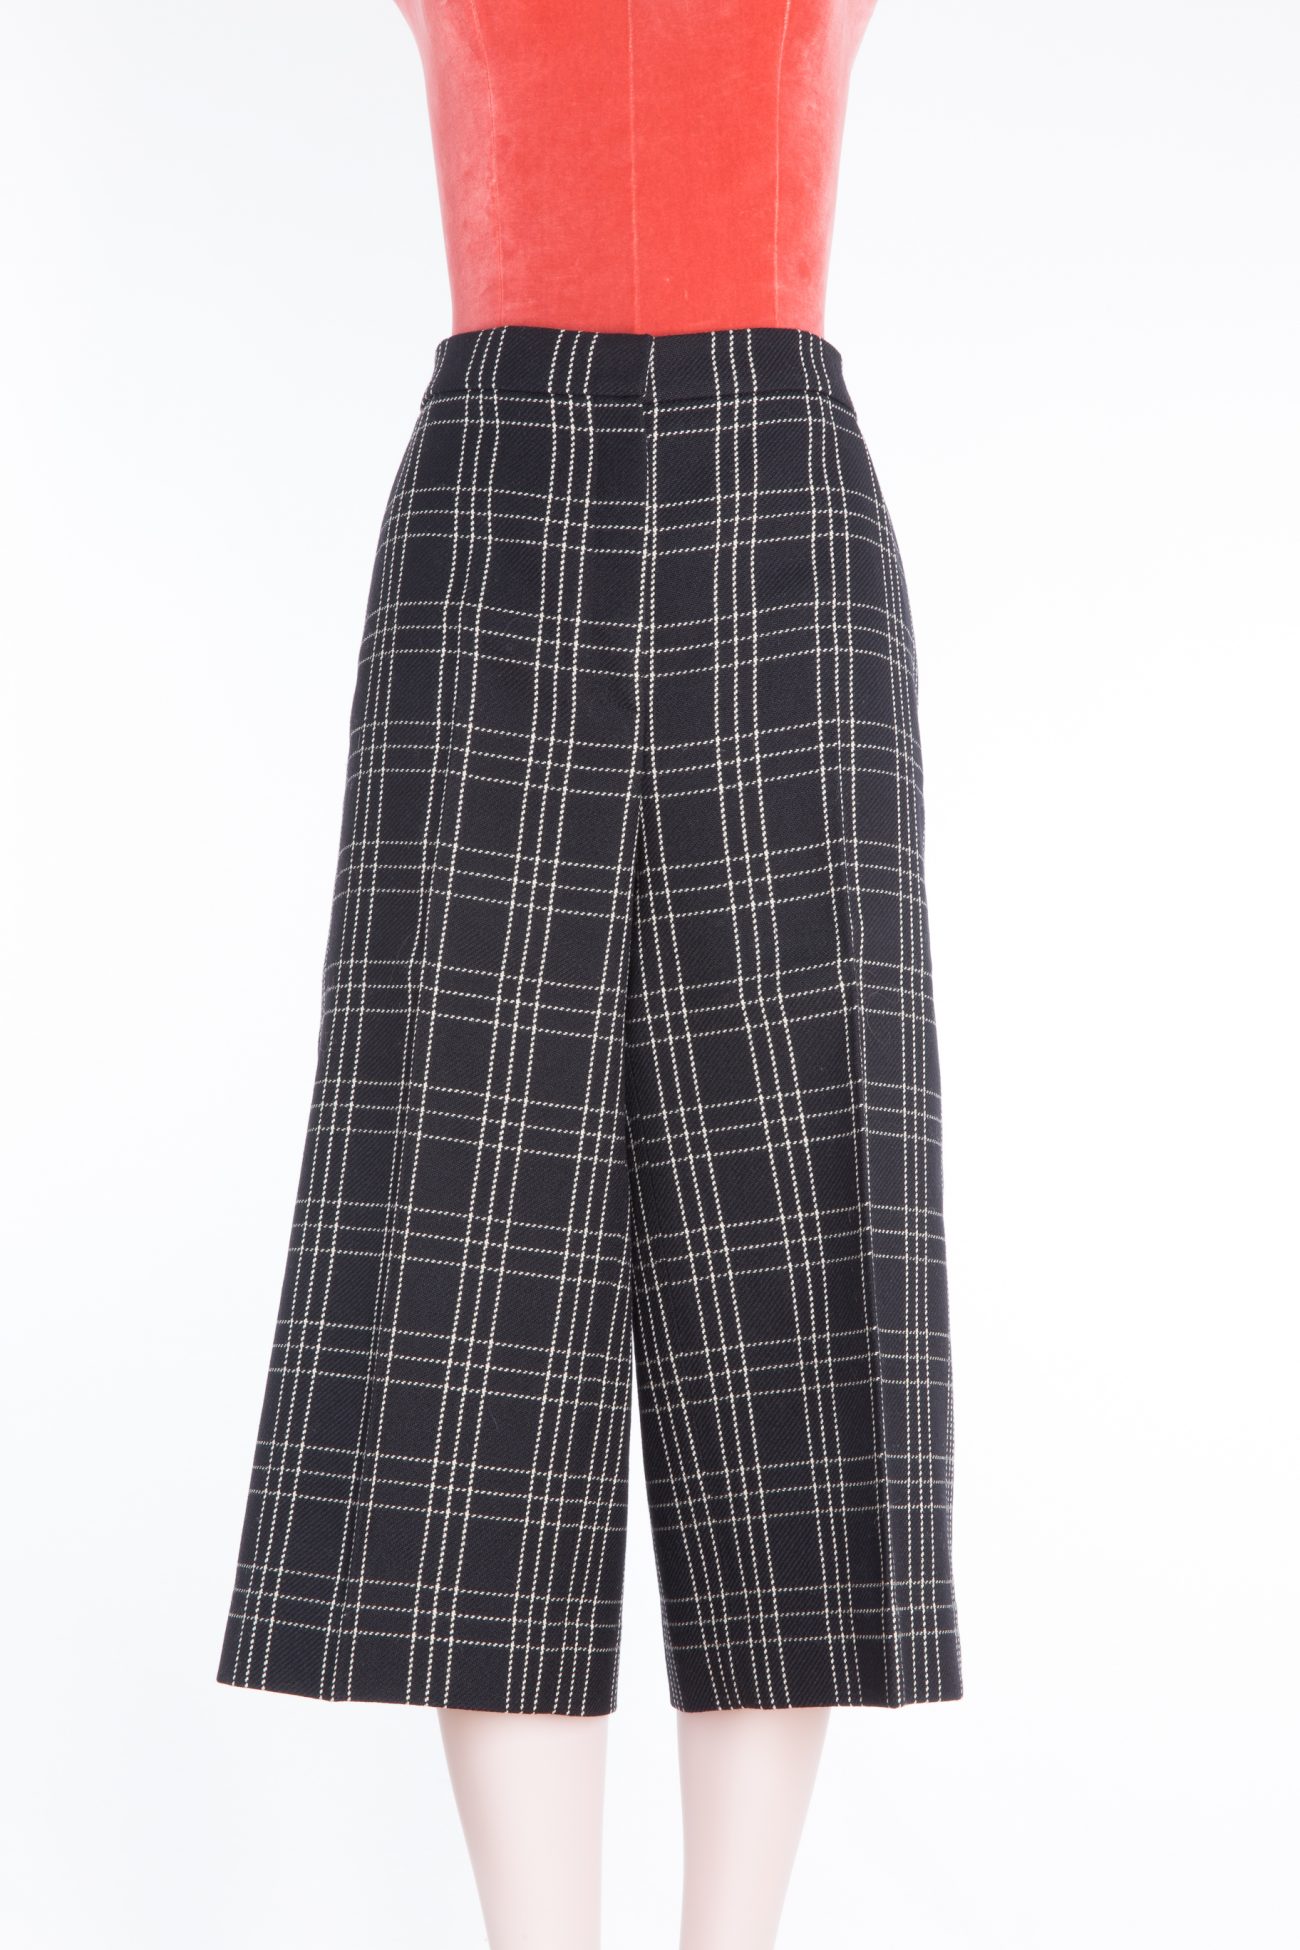 Dior Authenticated Trouser